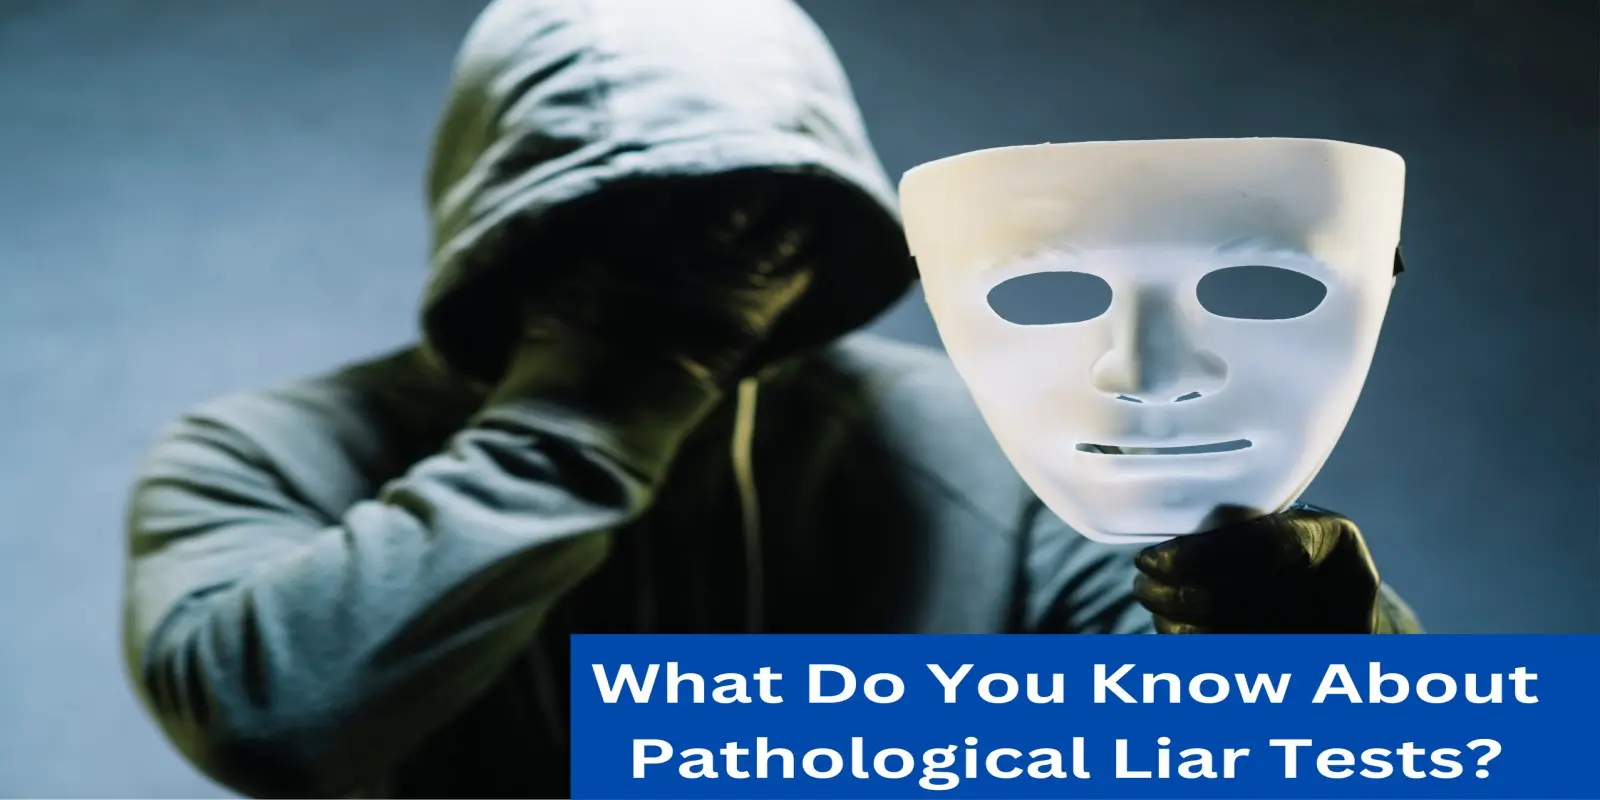 What Do You Know About Pathological Liar Tests?